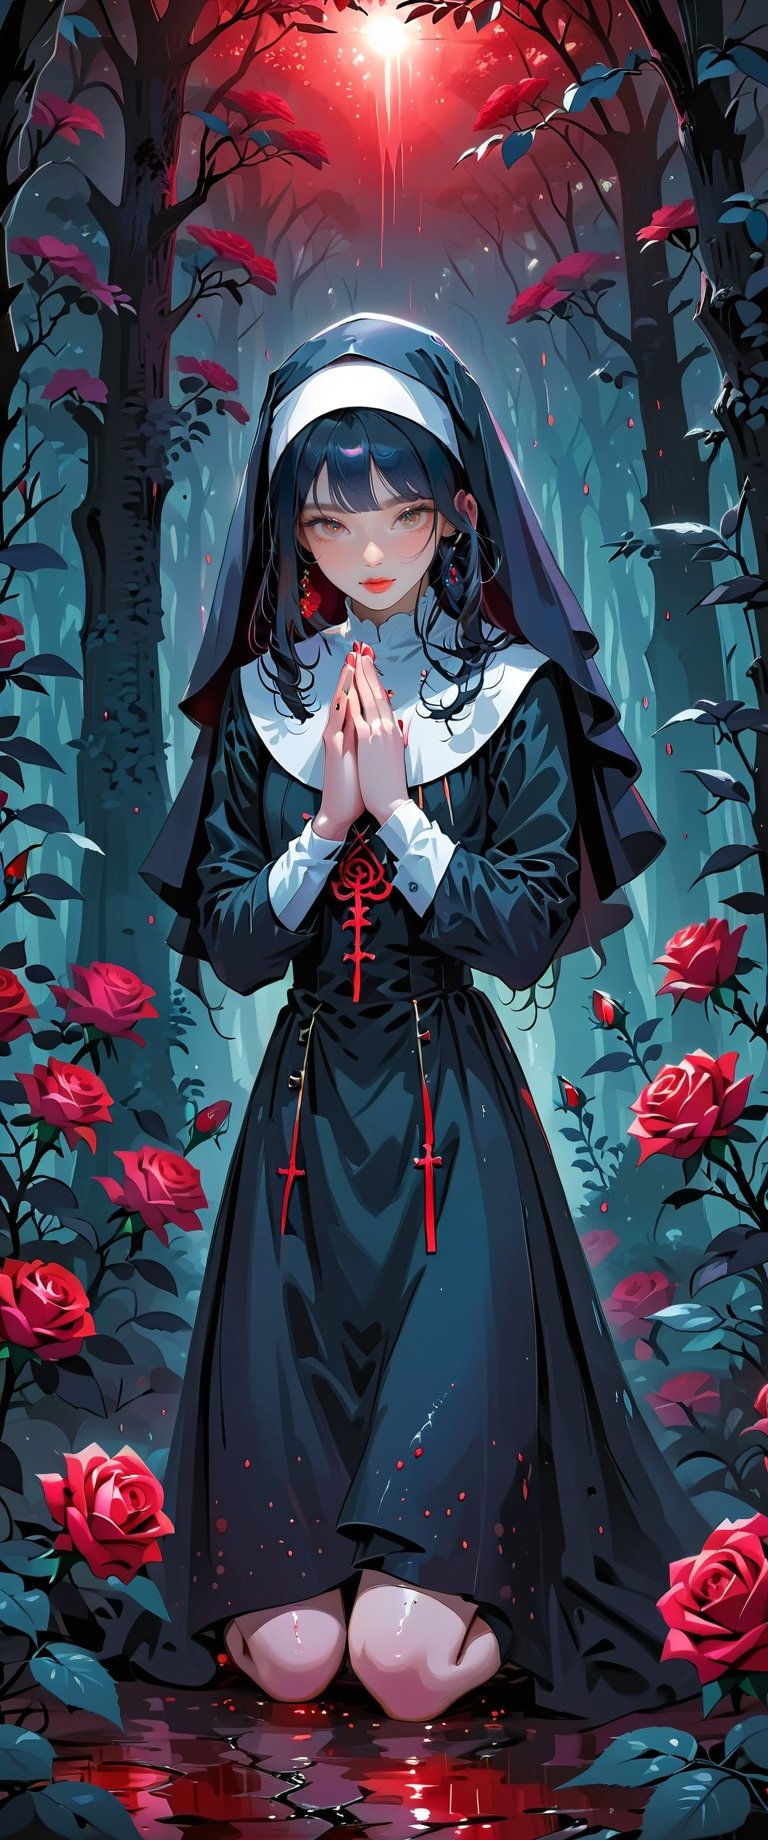 masterpiece, {{illustration}} 1 girl, full body, serene face, calm, black nun's dress, headband of red roses, poisonous roses, praying, inherited by thorny brambles, in front of rose bushes with red roses, scarlet dragon in the background in the middle of a forest. (sweaty:1.1), , 